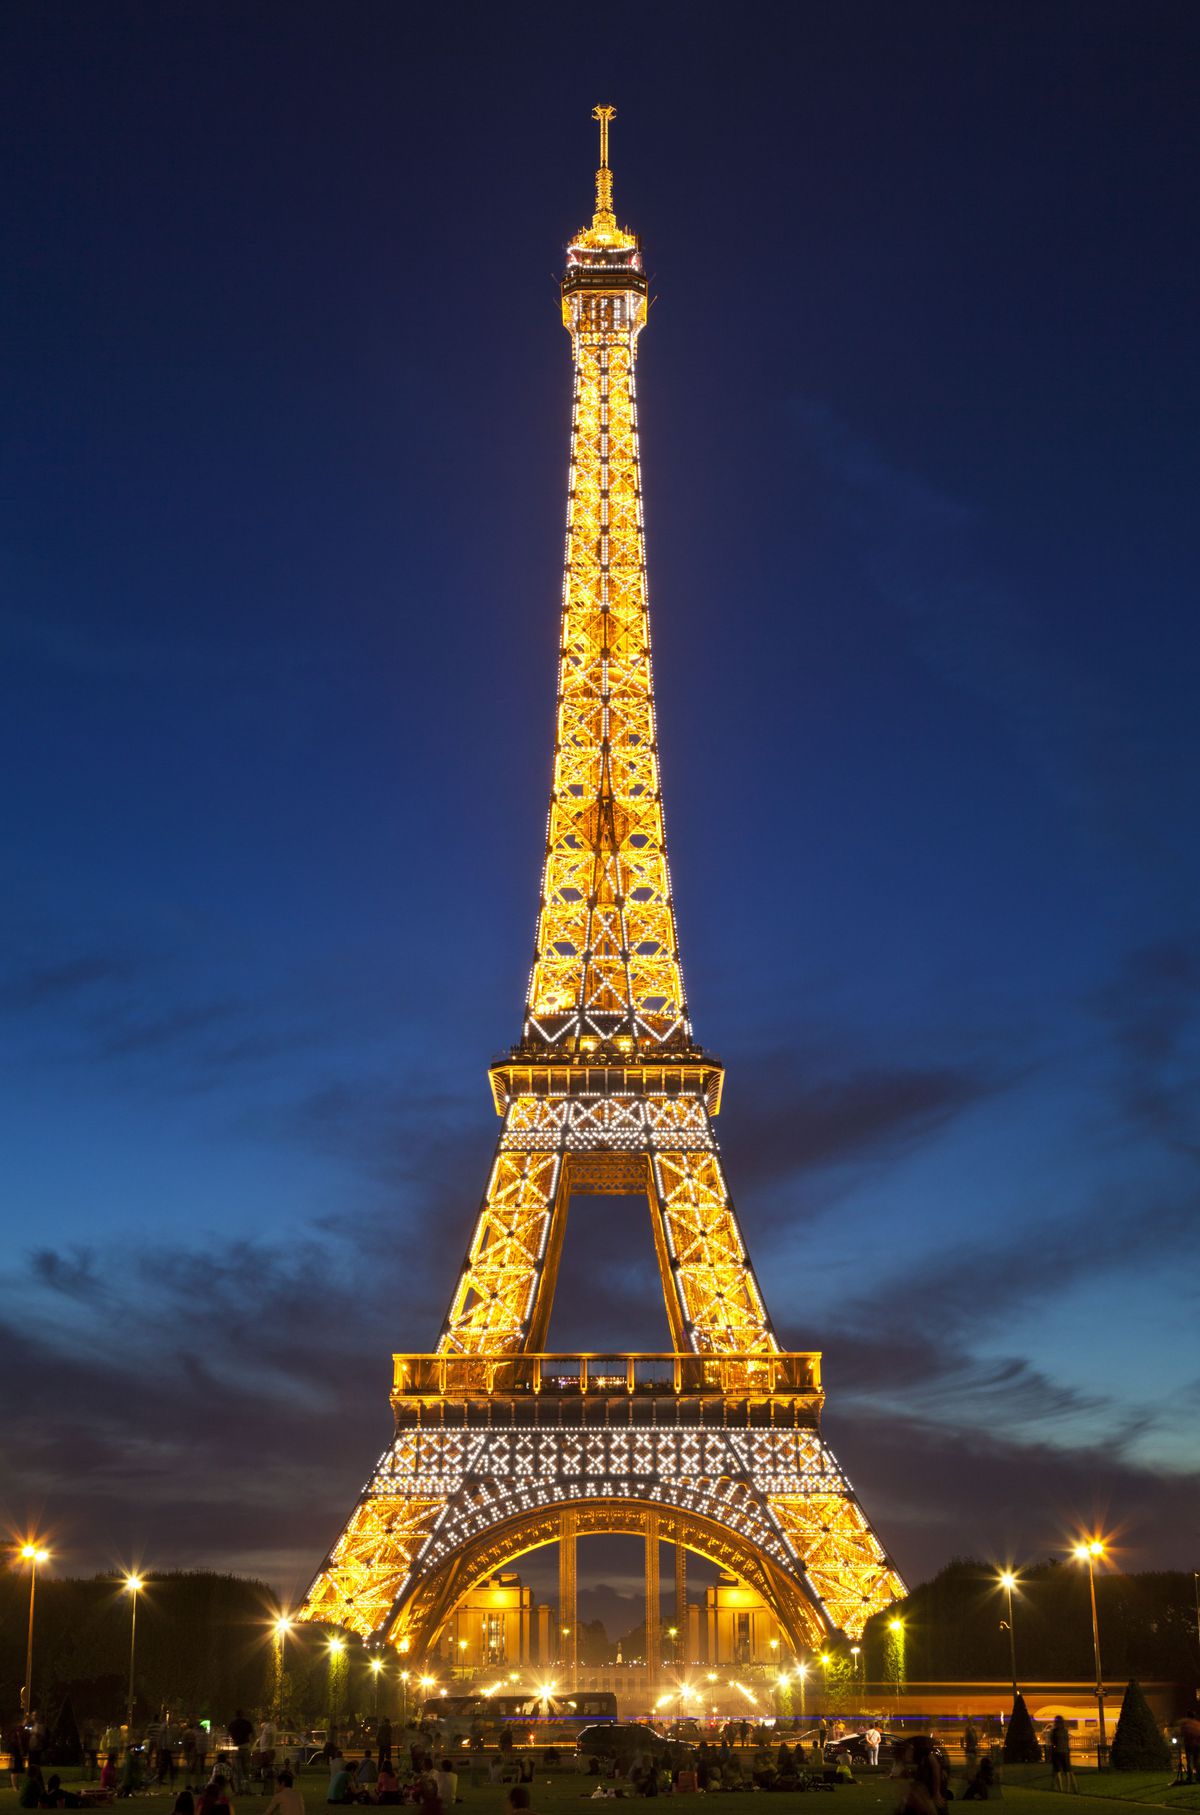 HomeAway is renting out the Eiffel Tower for the first time ever